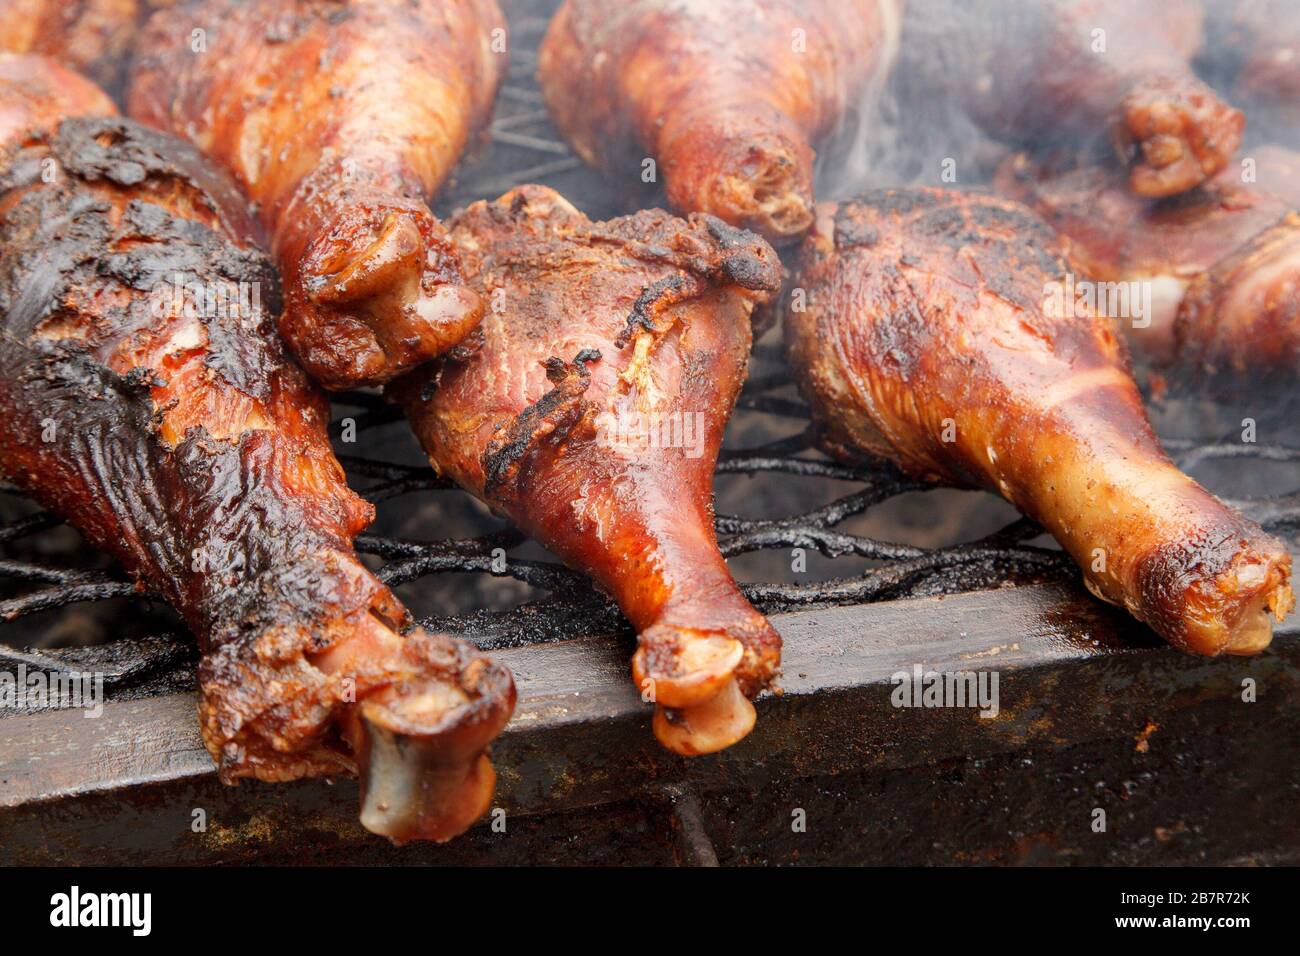 Chicken Legs on Grill with Smoke Stock Photo